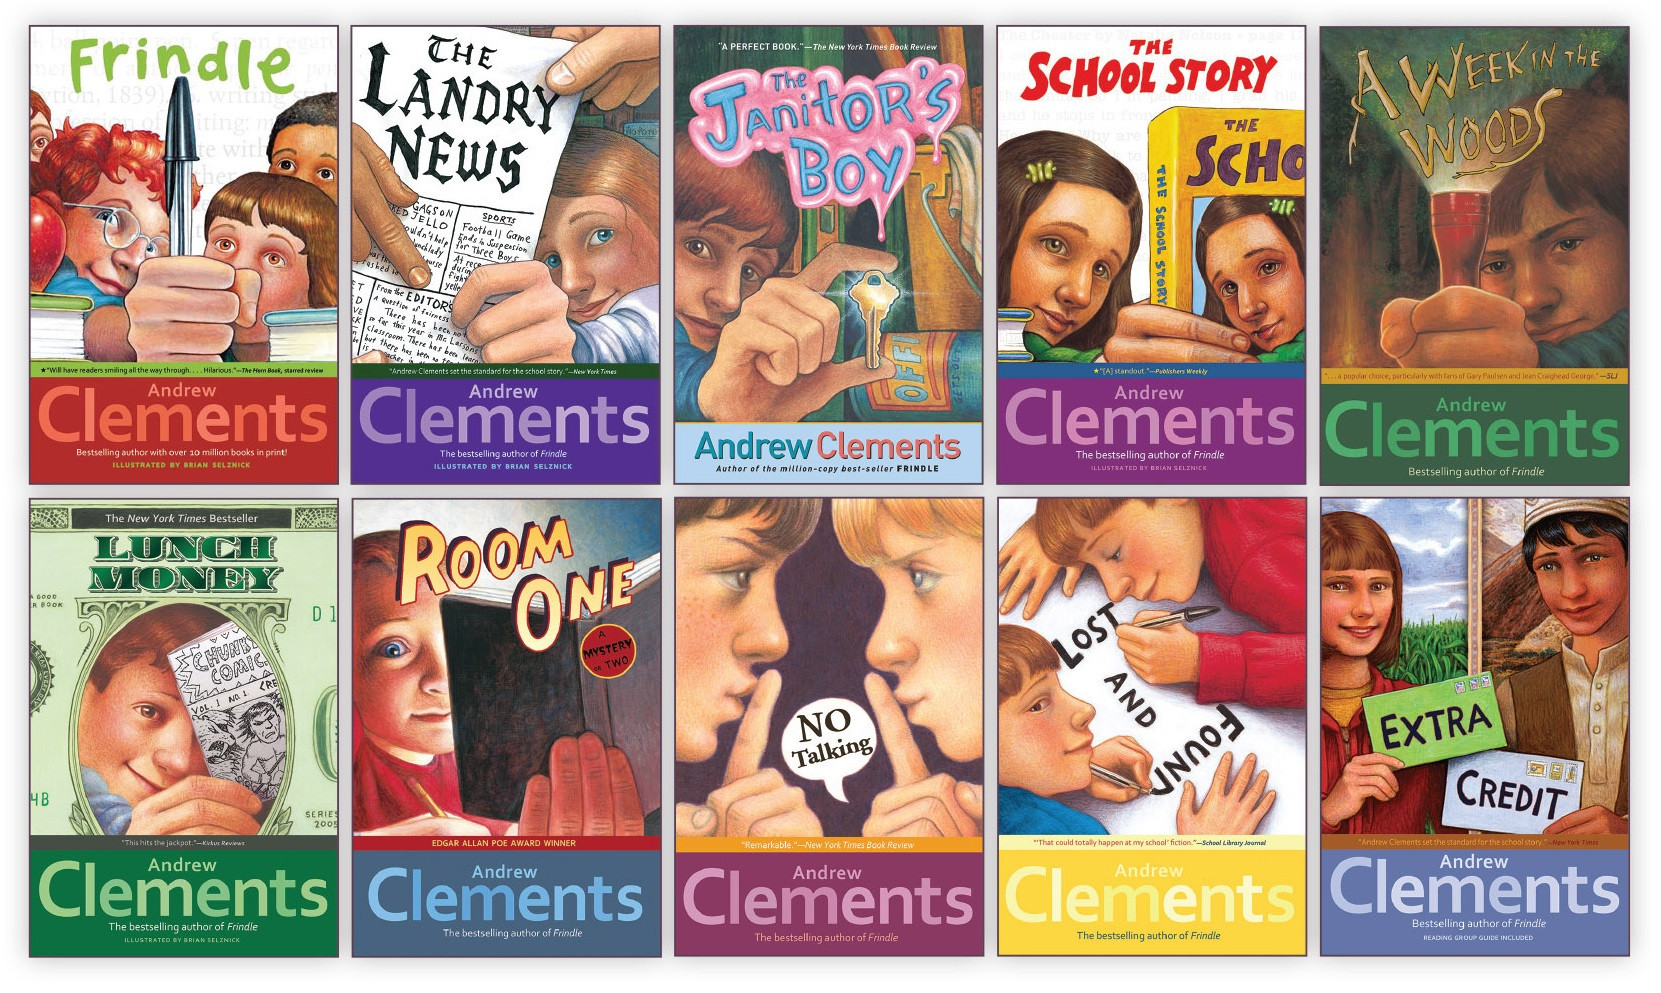 hair coloring - The Frindle Landry School Story A Week In the News Cannors Chg Weds Clements Clements Andrew Clements Clements Clements Lunicit Money Room S07 No And Extra Talking Anno Credit Clements Andrew Andrew Clements Clements Clements Clements